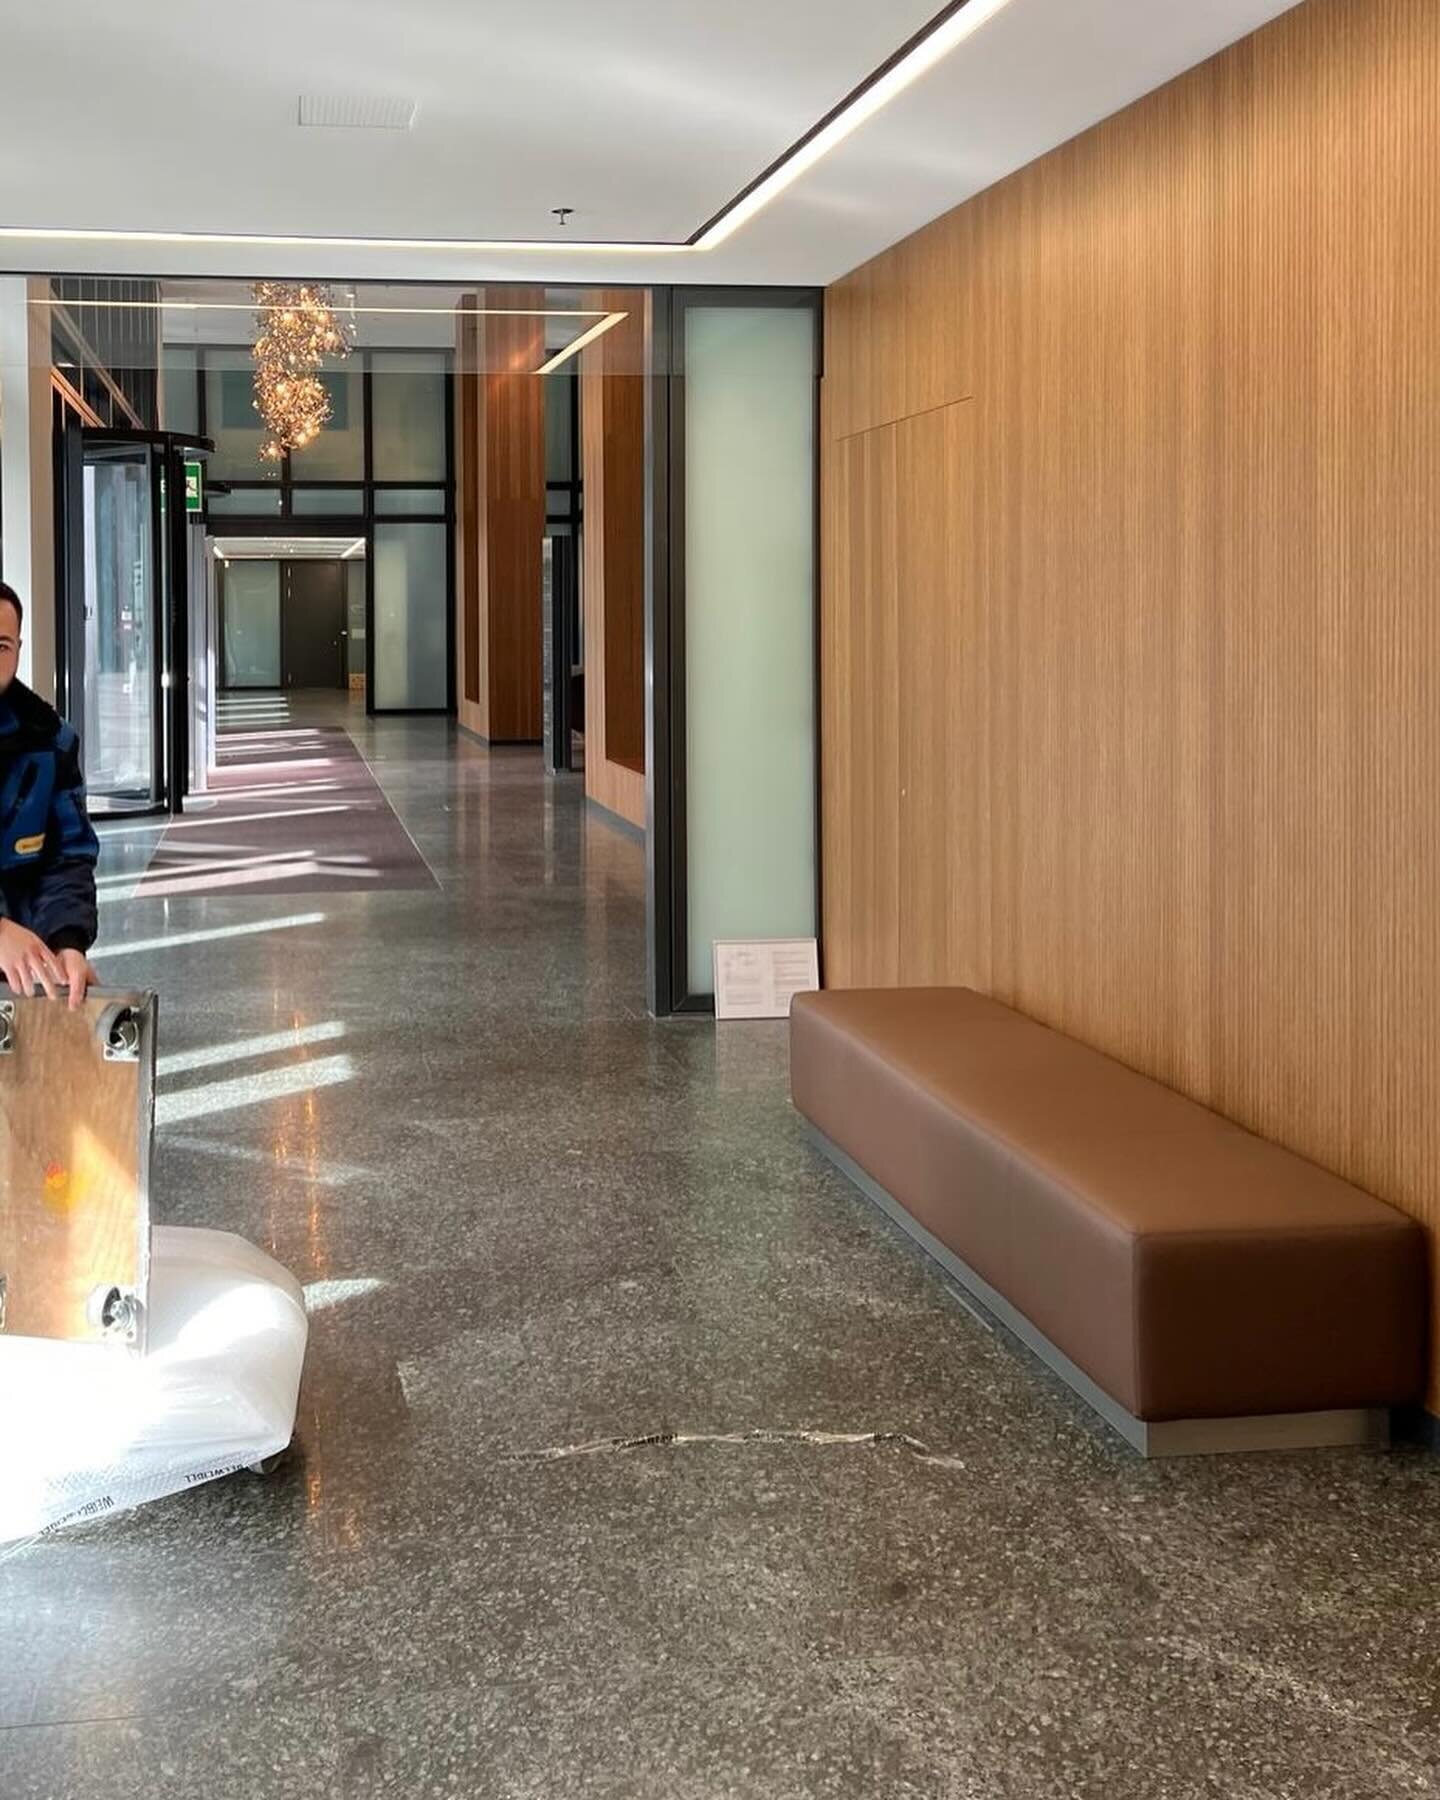 just in time before the easter weekend, we are installing an entrance hall of a swiss insurance company&hellip; a glimpse behind the scenes&hellip; work in progress&hellip; remember what craftsmanship it takes to reach a result that looks totally nat